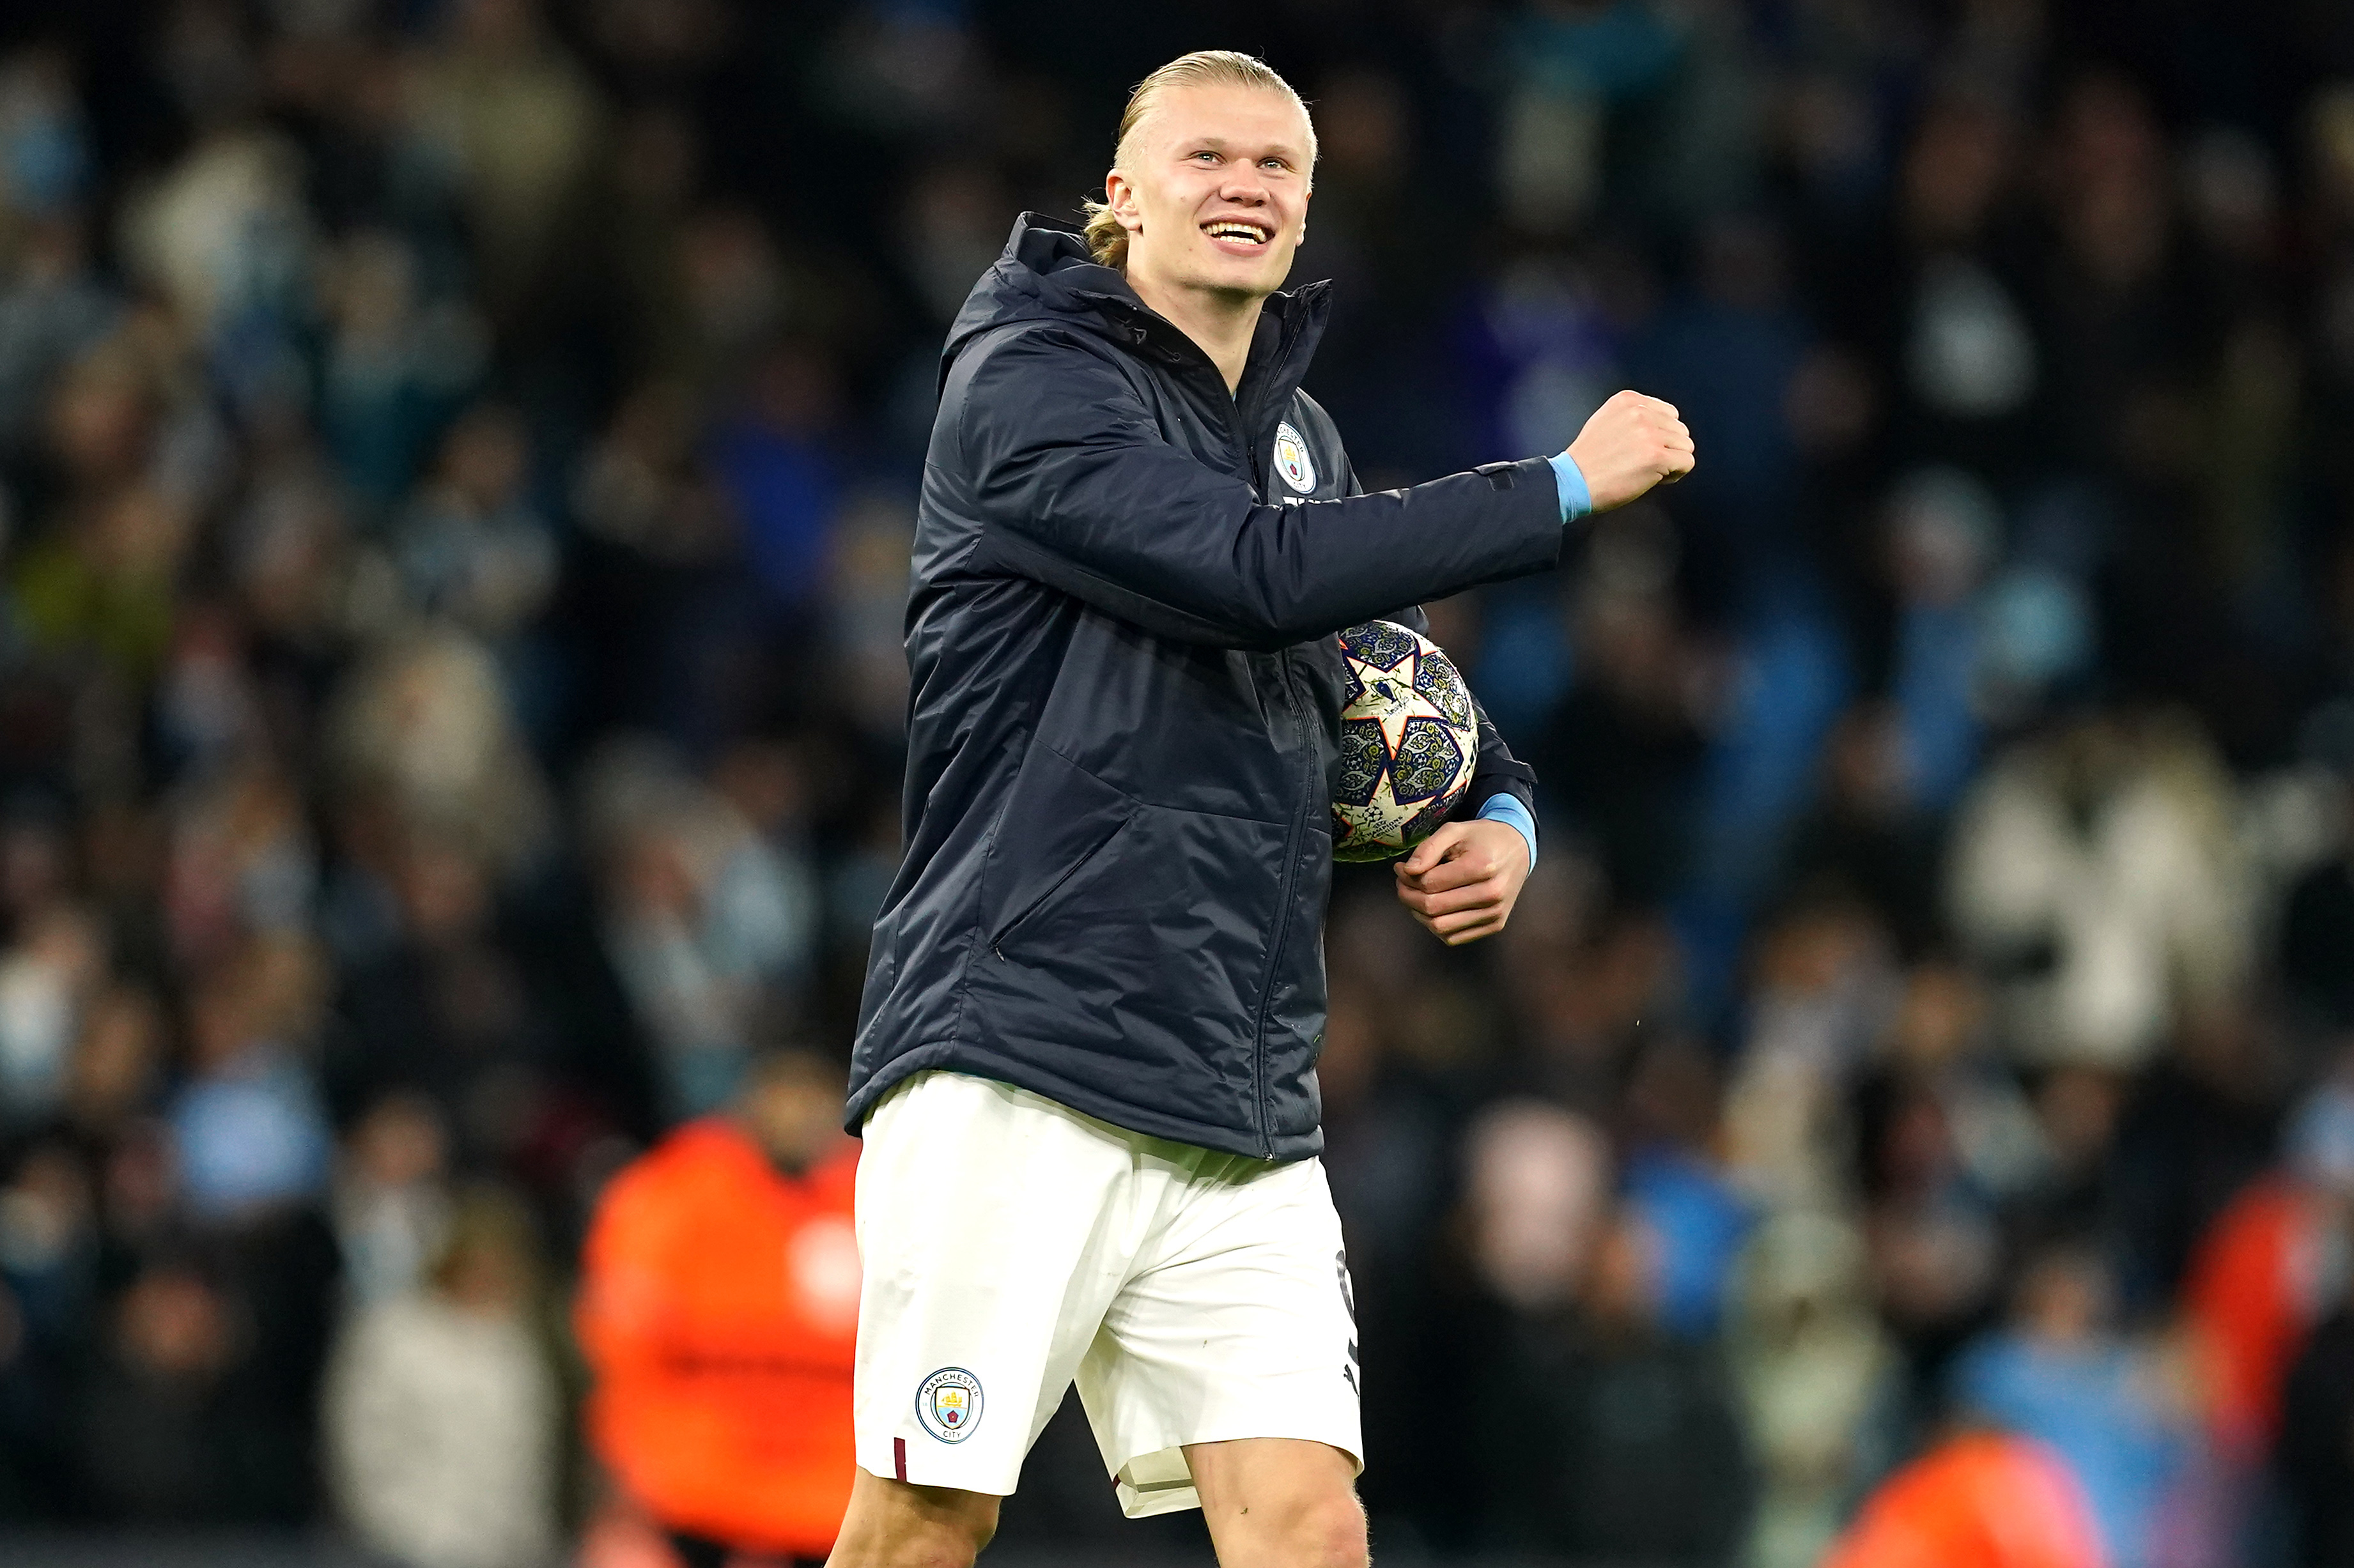 Erling Haaland celebrates with the match ball after scoring five goals against RB Leipzig